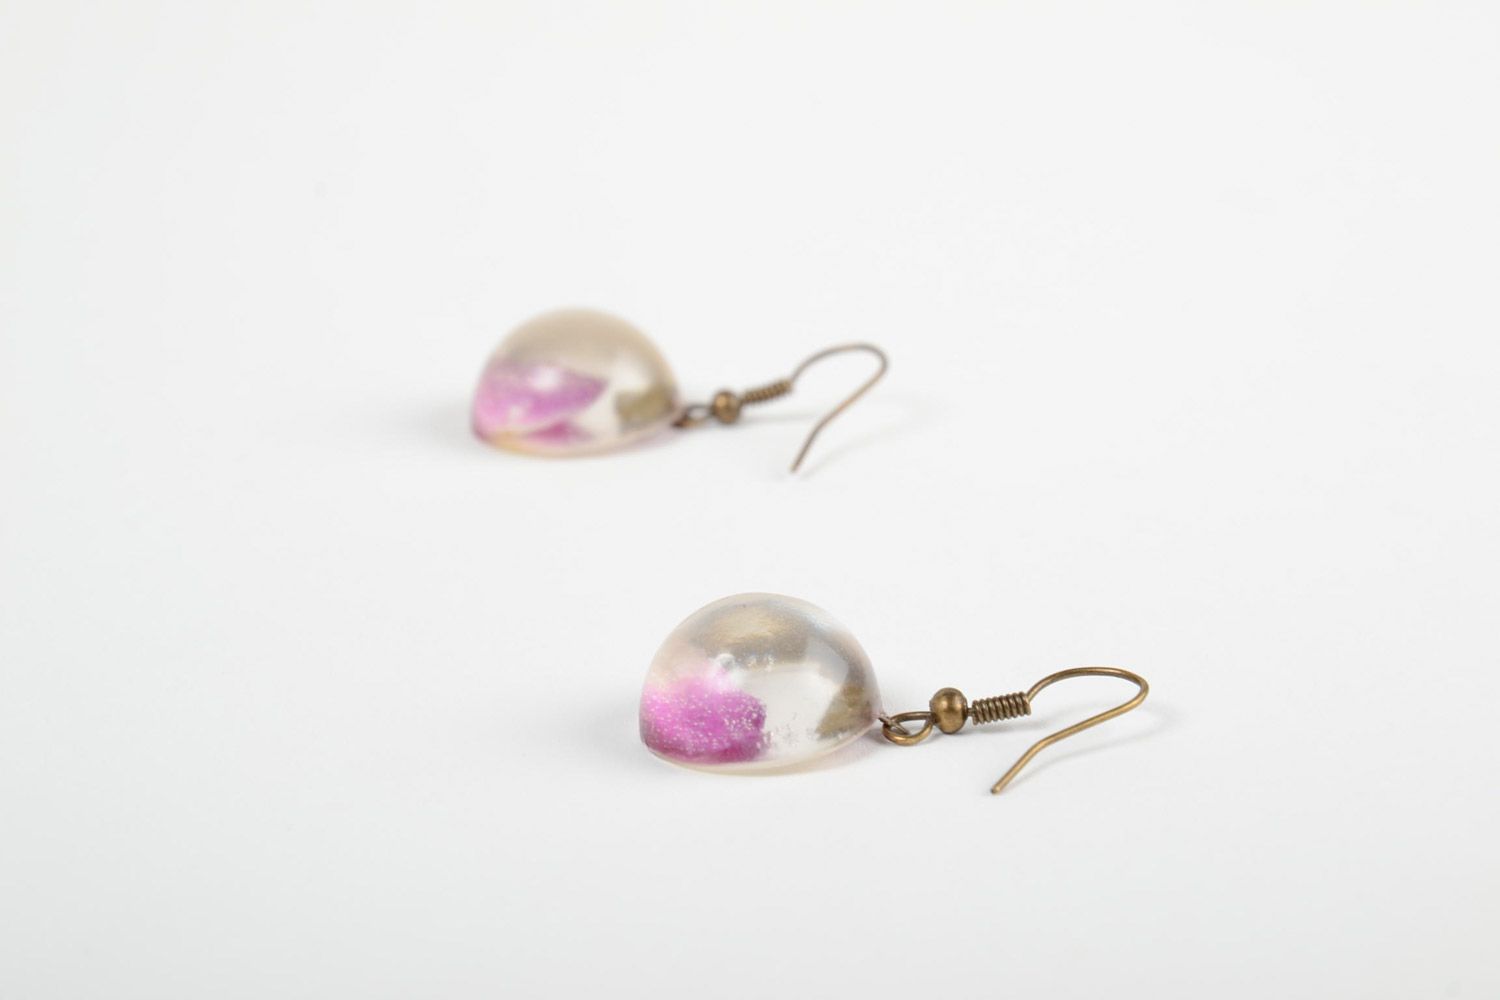 Handmade round earrings with real flower petals coated with epoxy photo 4